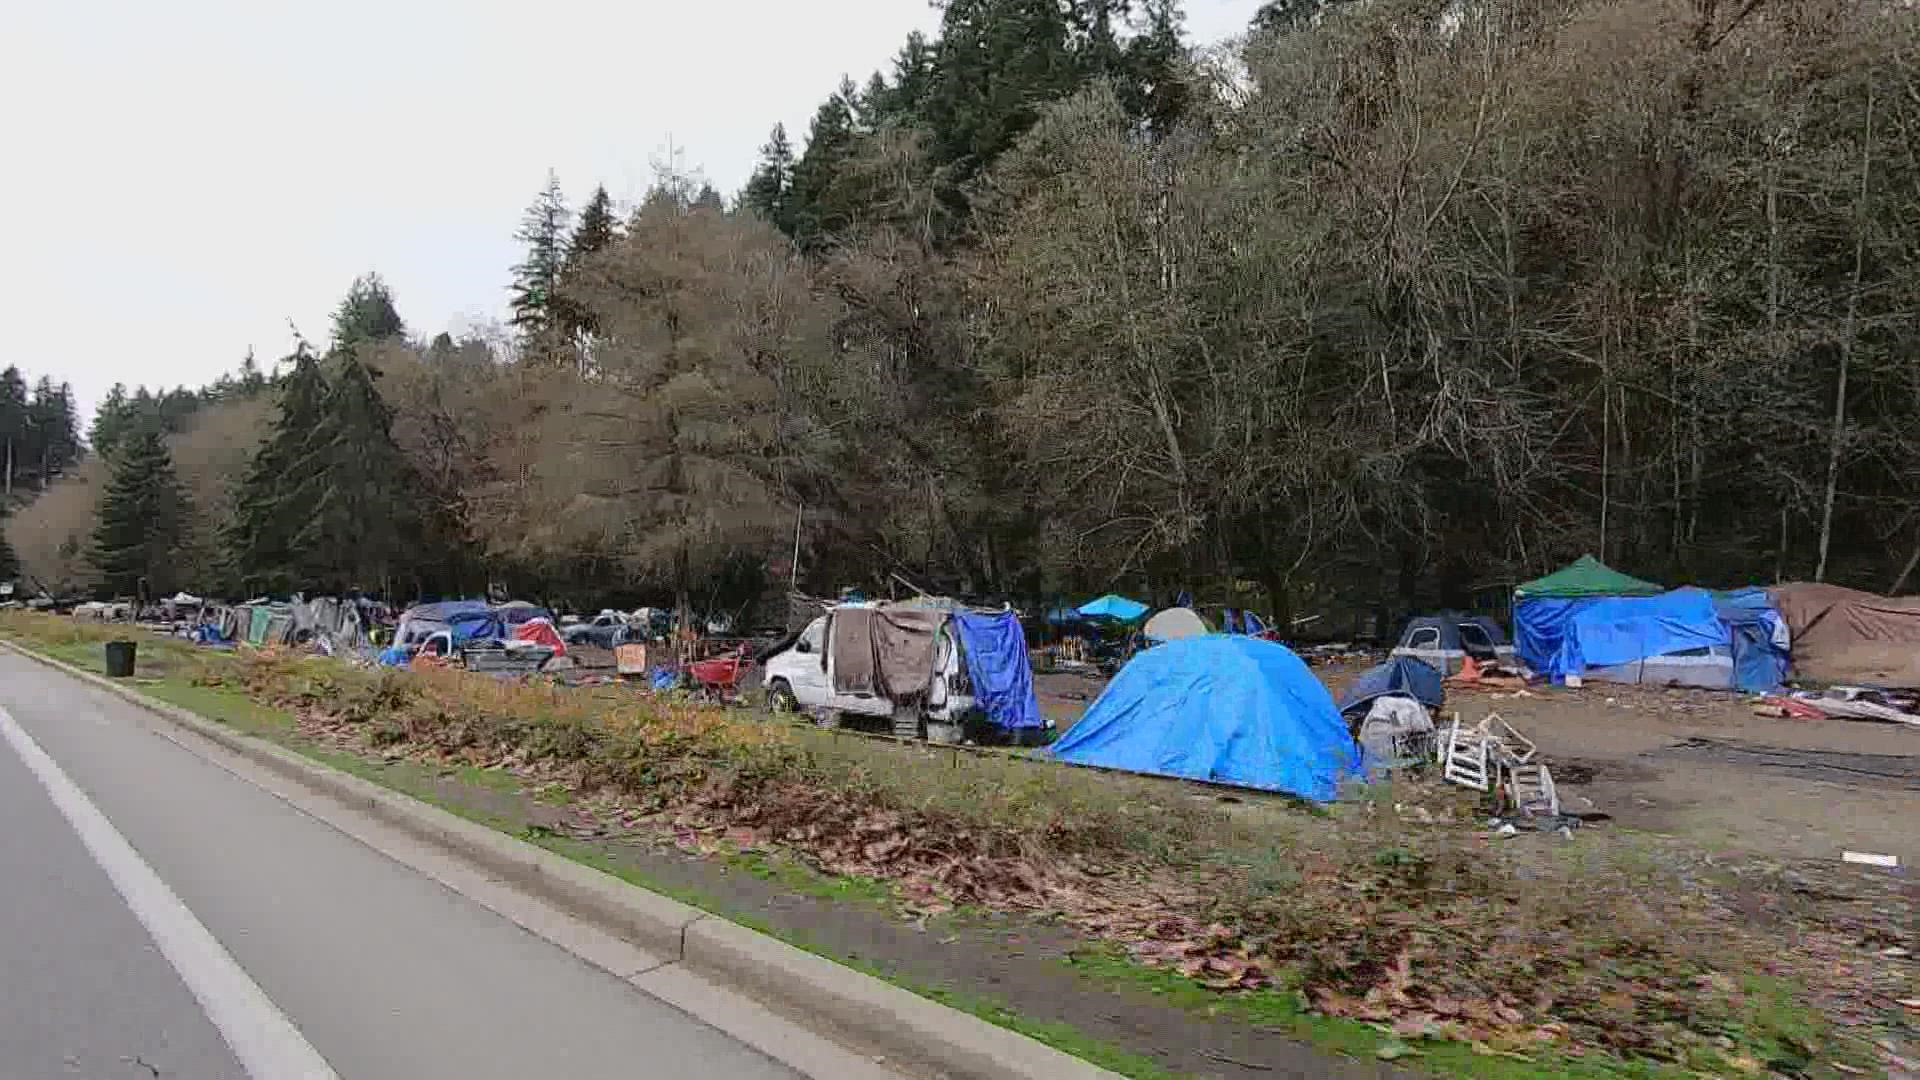 A homeless camp will be swept from an area near the state capitol in Olympia even though the city's shelter system lacks the space to accommodate more people.